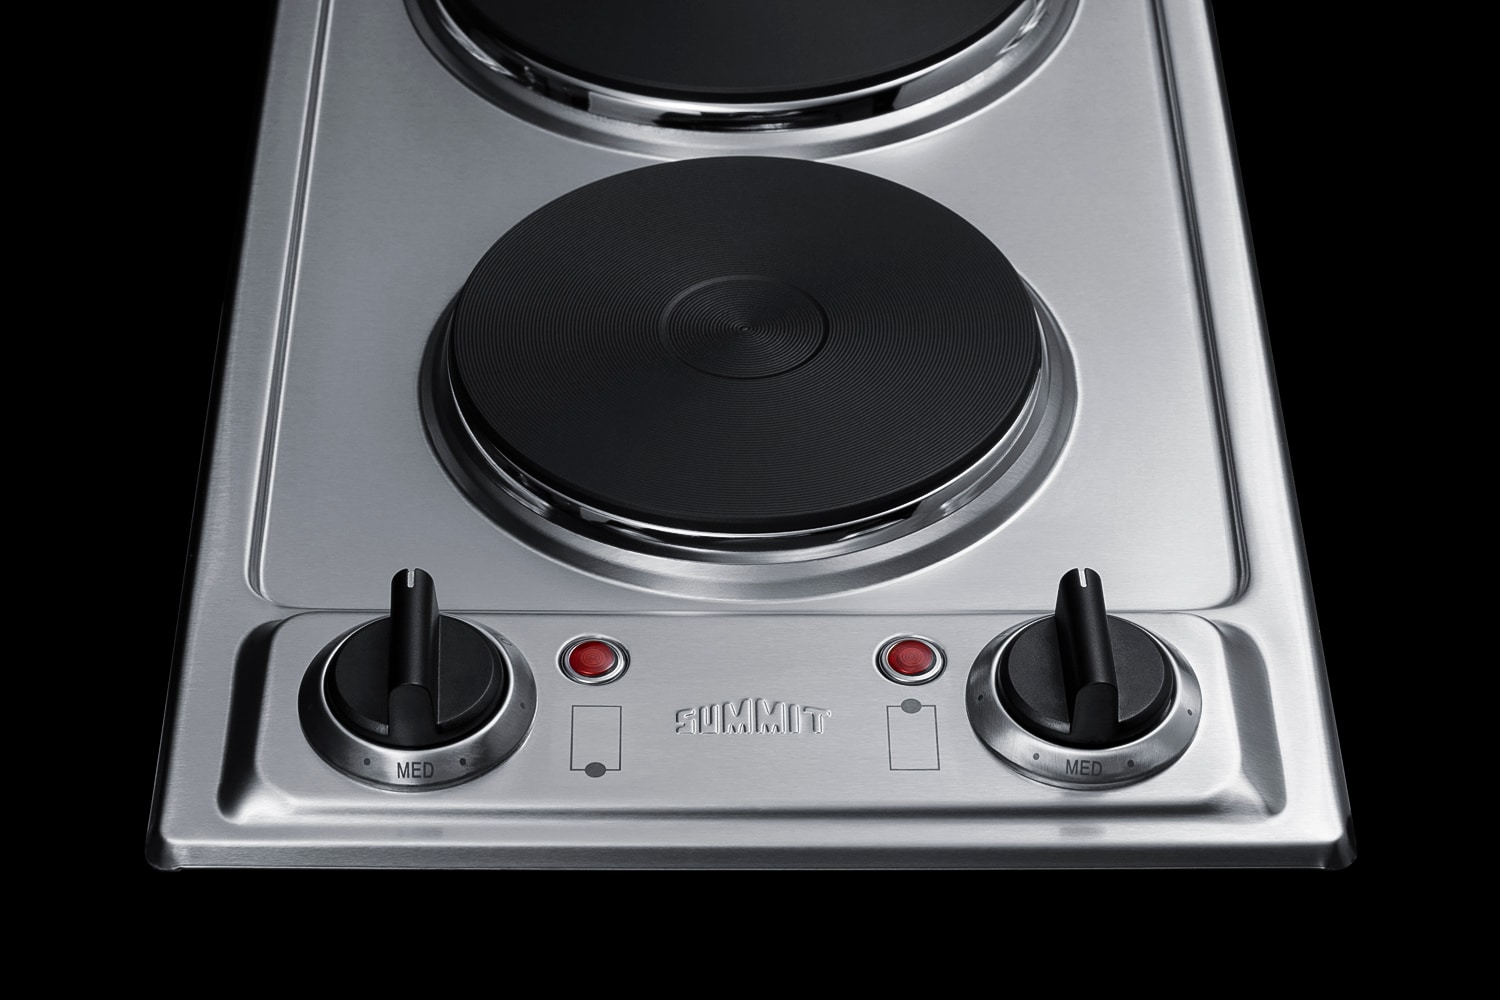 Summit 21 in. 2-Burner 220V Electric Cooktop - Stainless Steel